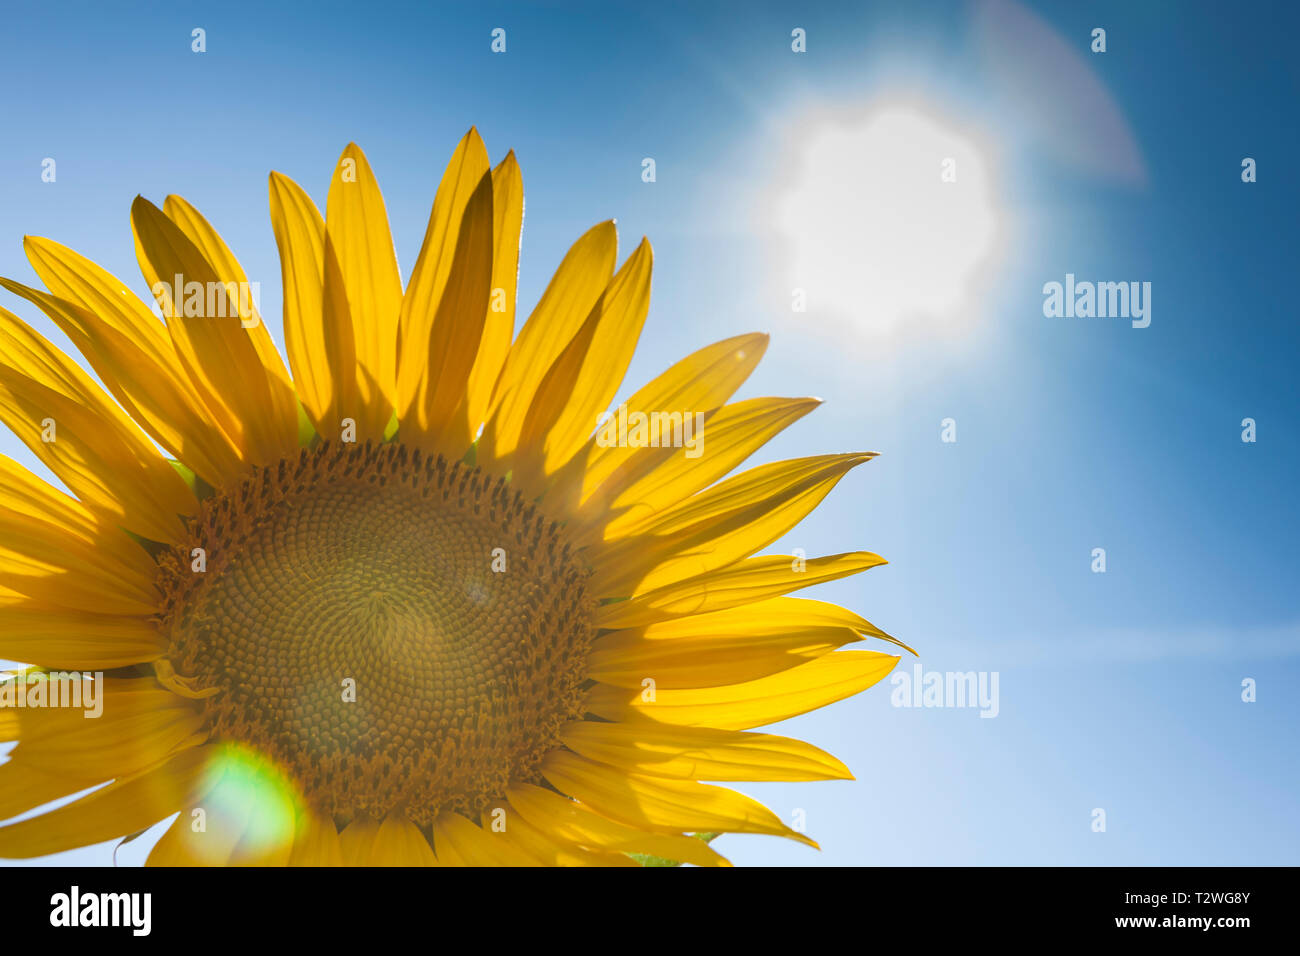 A sunflower blooming with the sun shining down Stock Photo